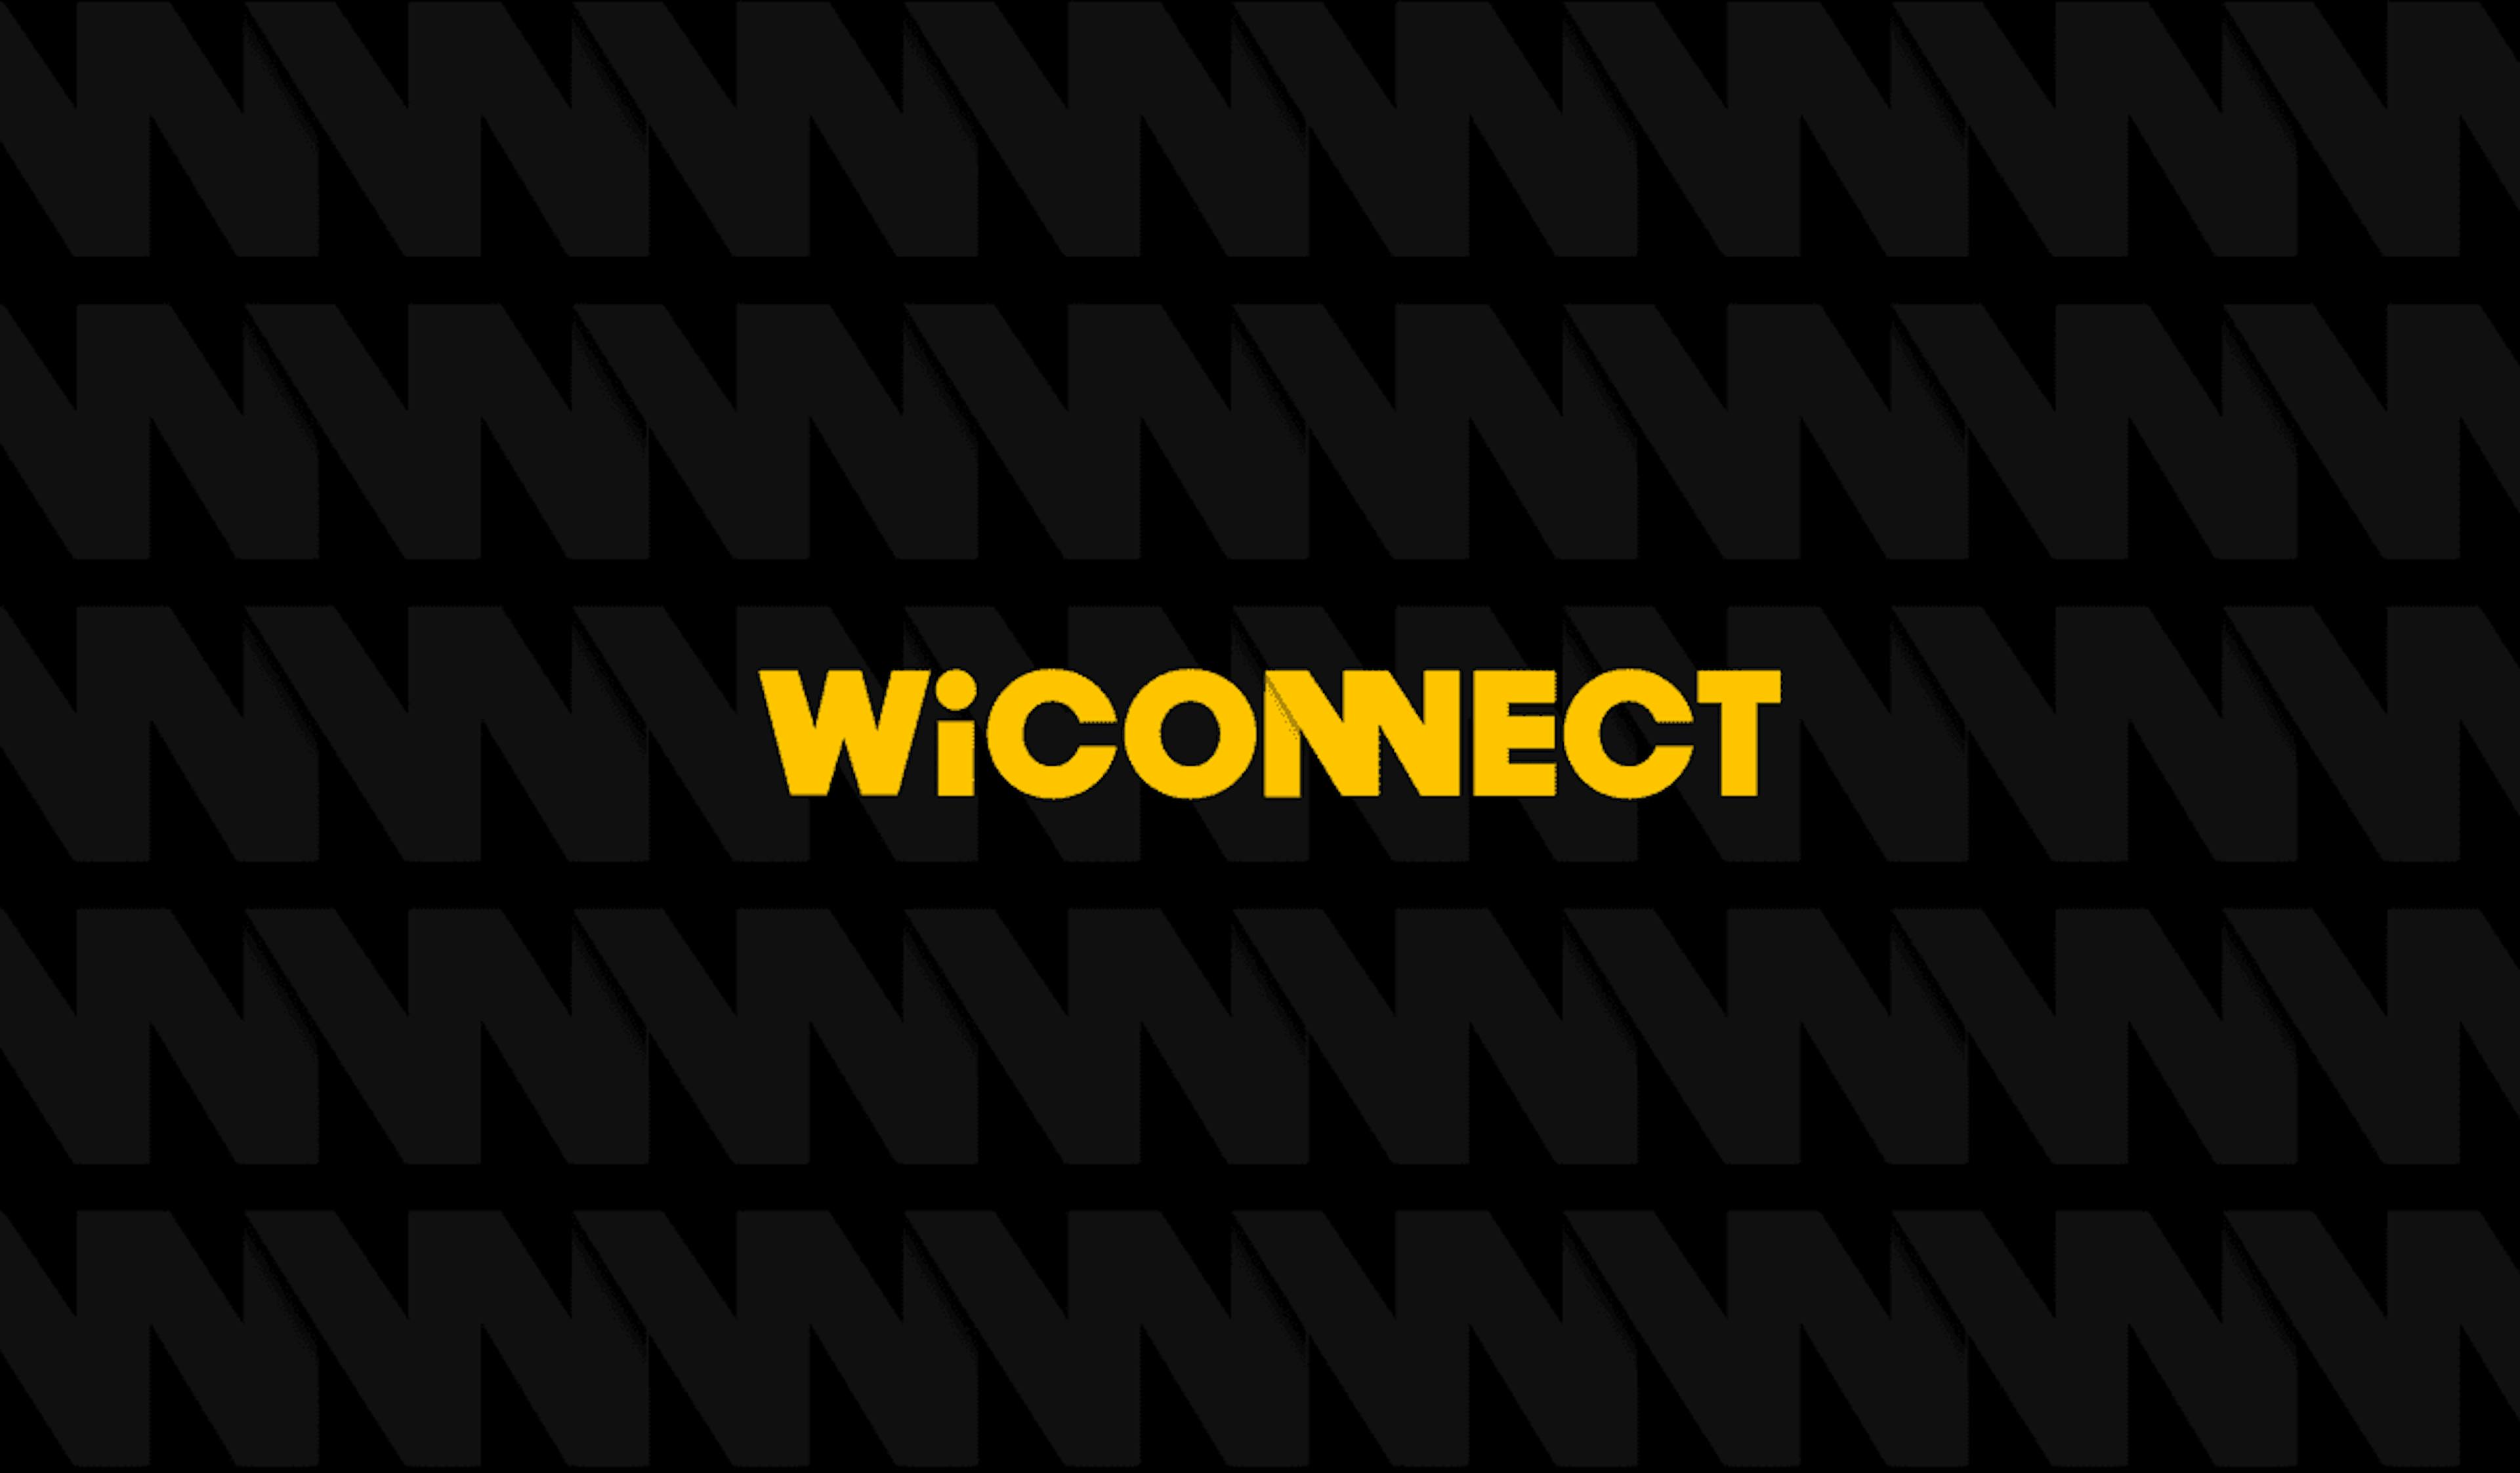 A yellow WiConnect logo against a patterned black background.